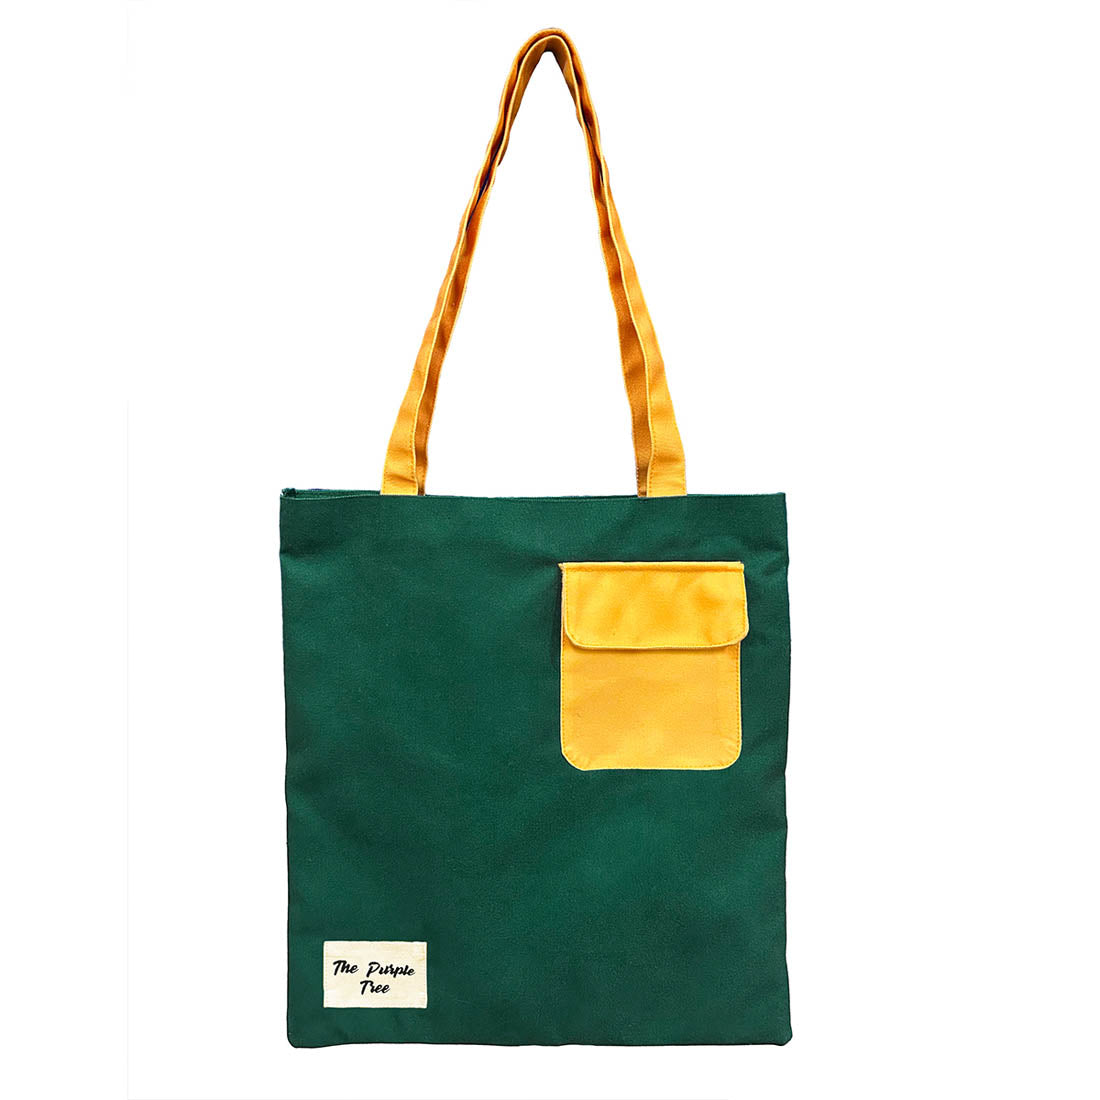  Fashionable tote bag in green and yellow hues, complete with a vibrant yellow pocket.